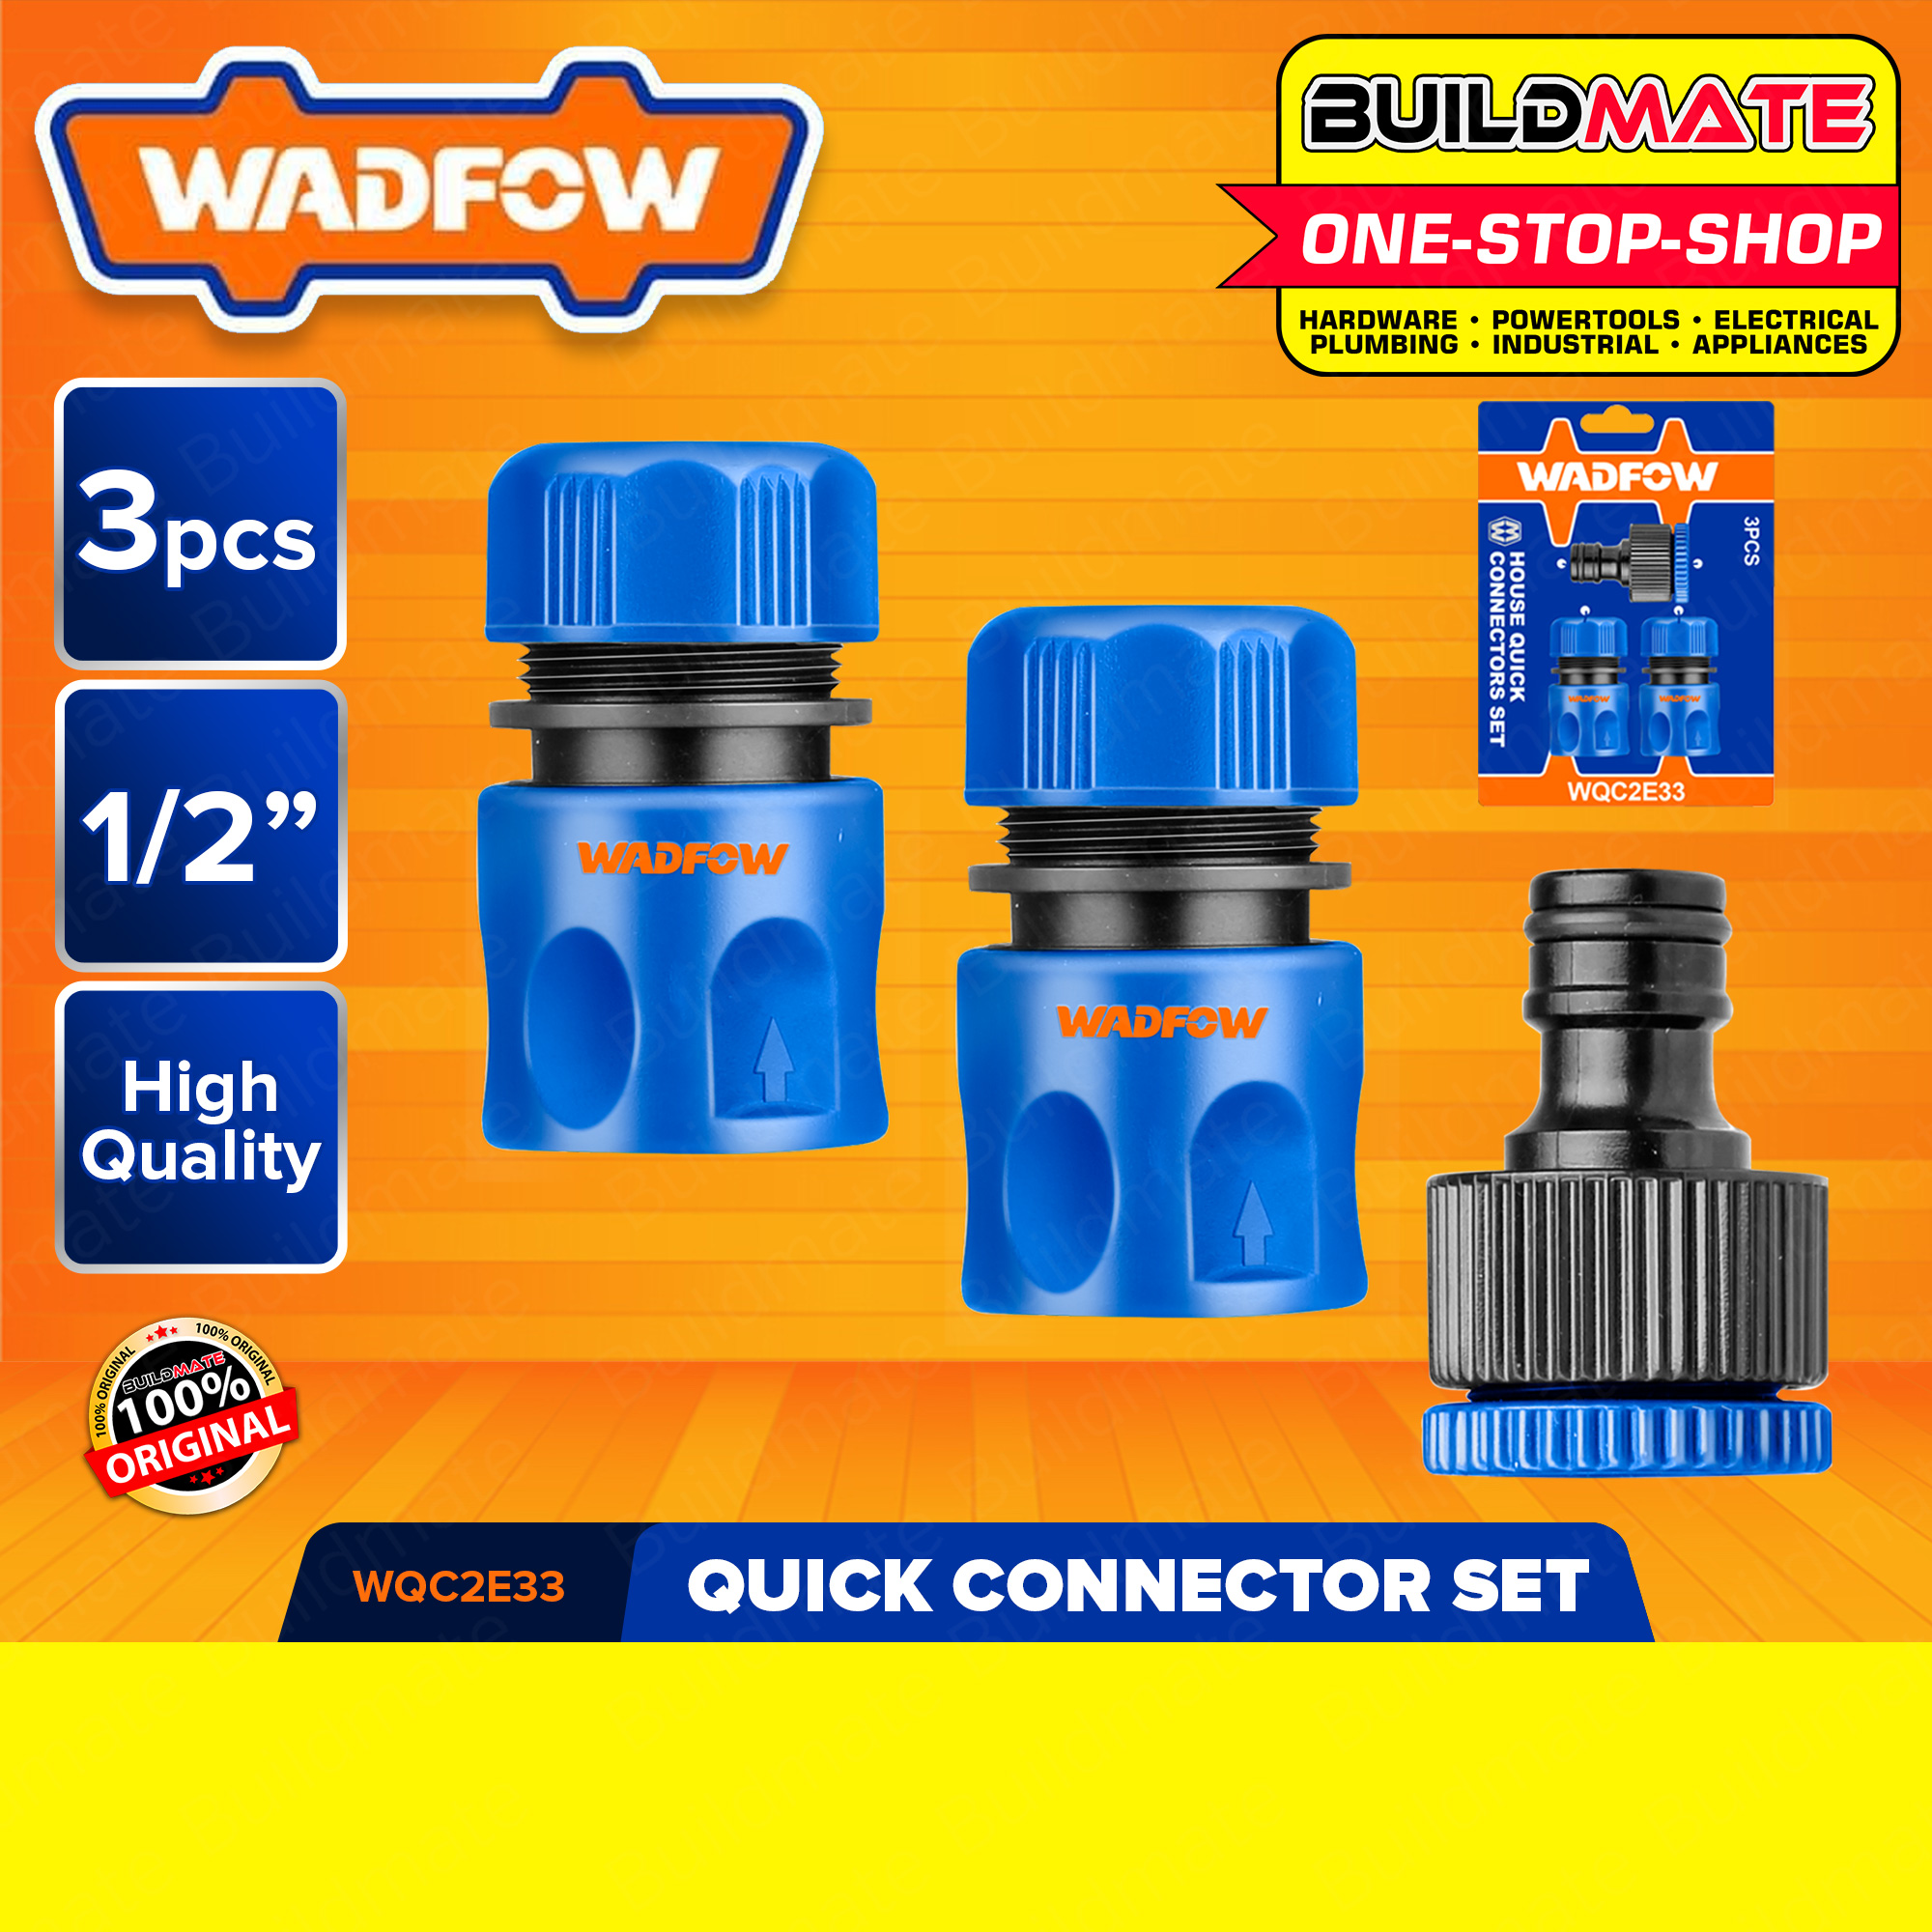 Buy WADFOW Watering Systems  Garden Hoses Online | lazada.com.ph